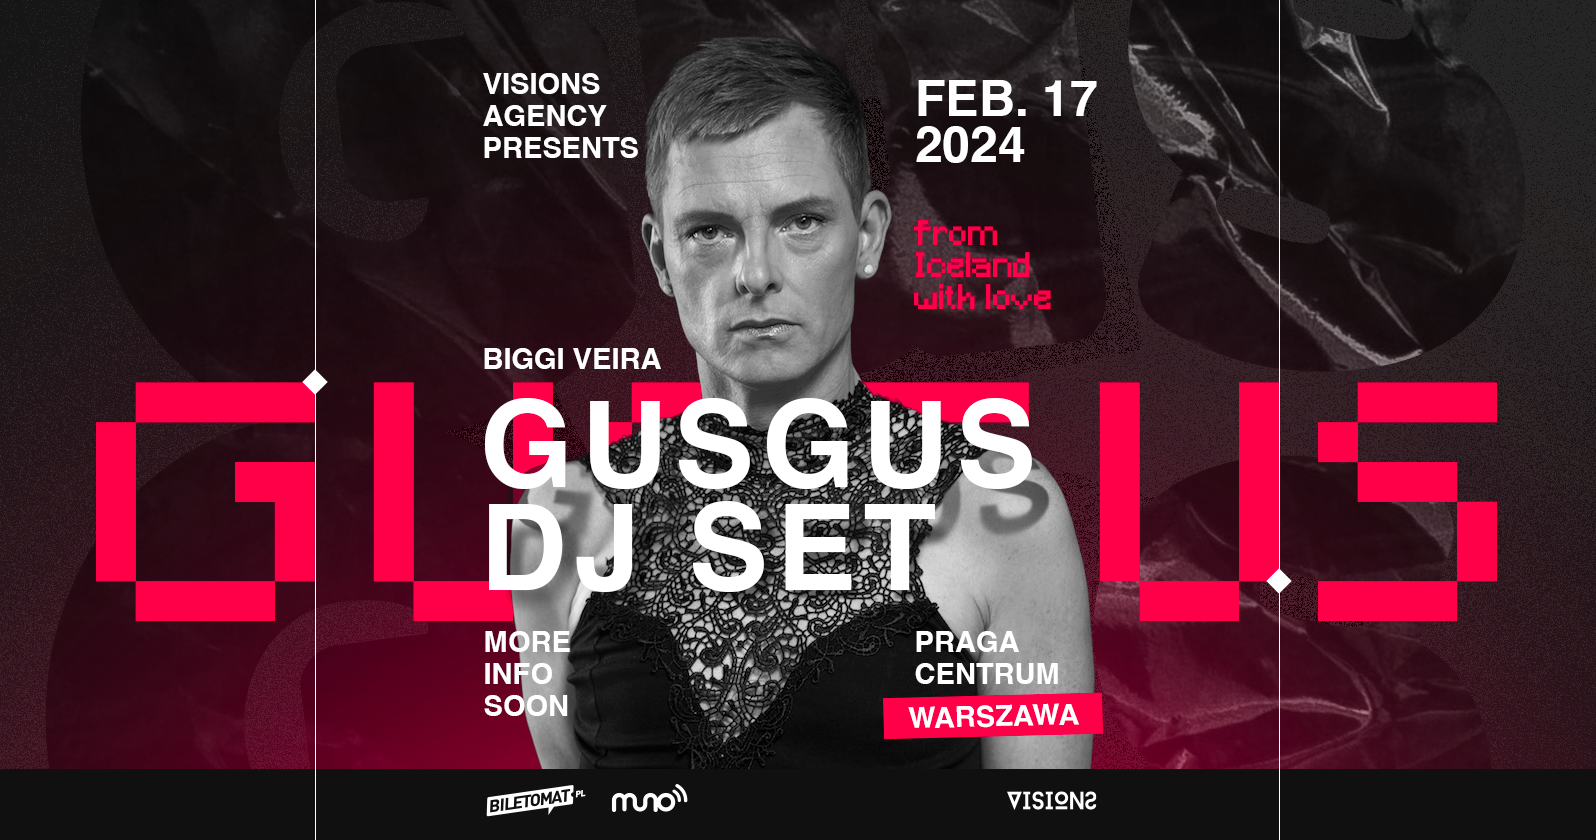 From Iceland with Love GusGus DJ SET - フライヤー表